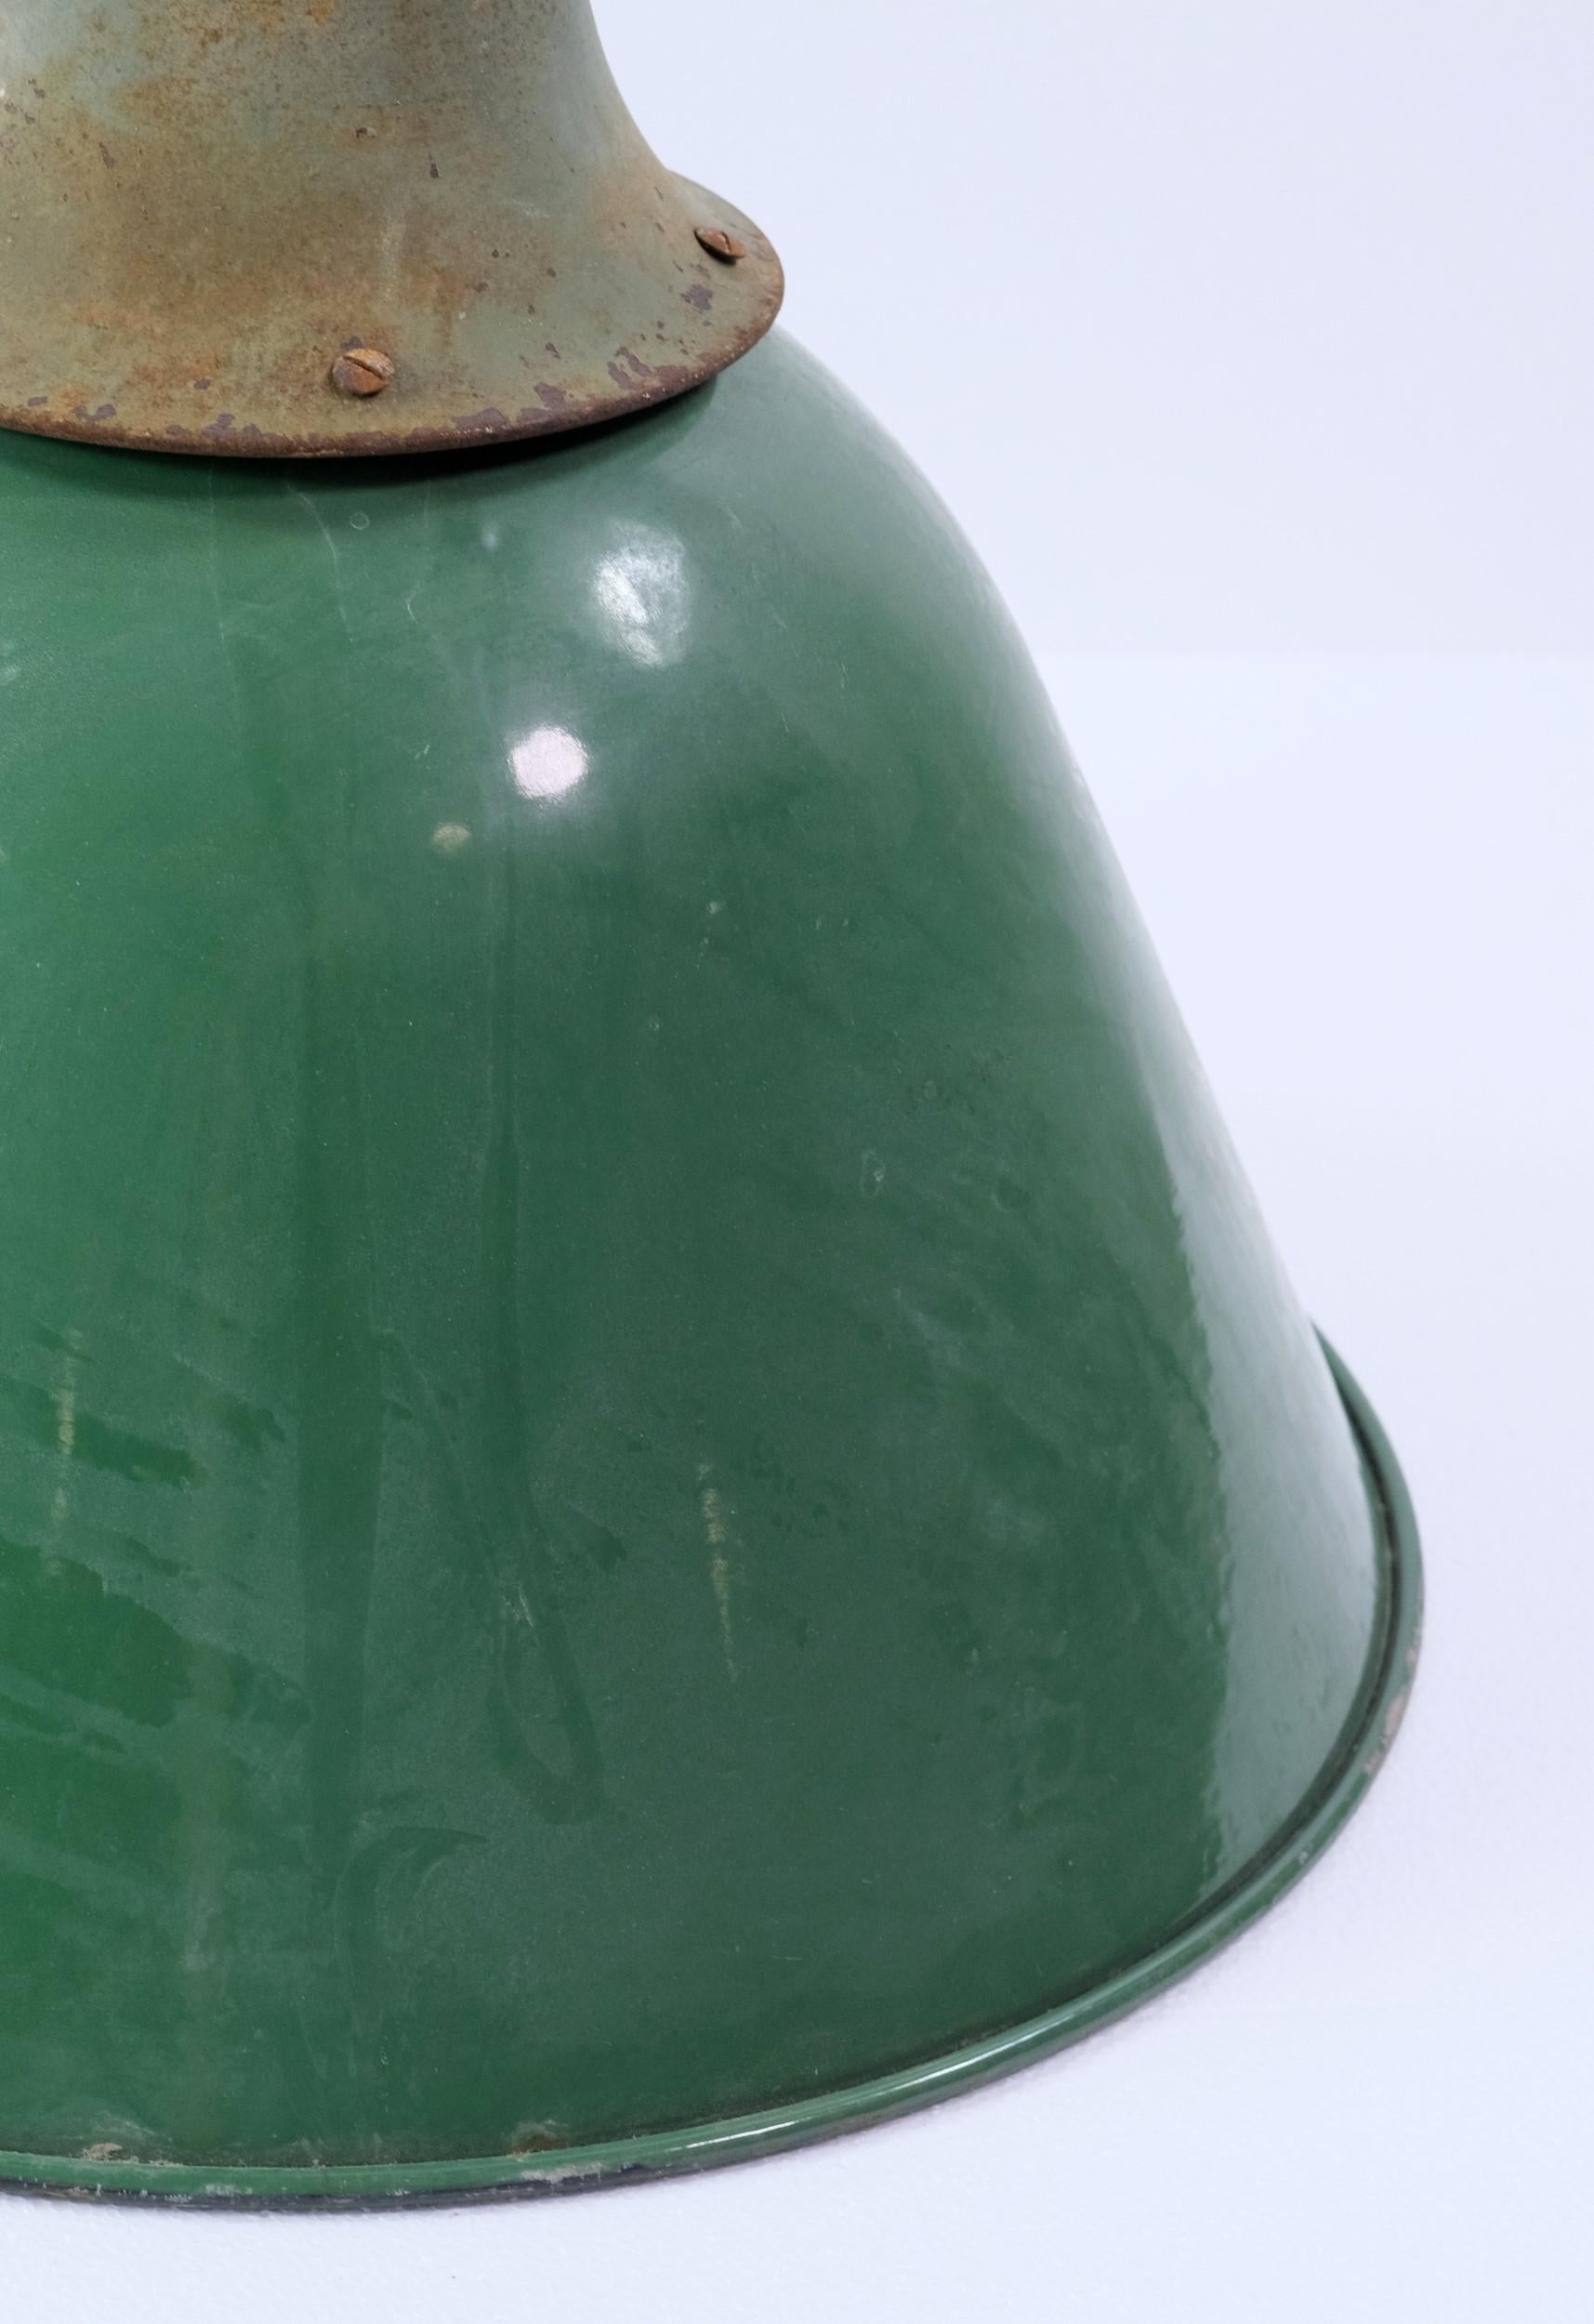 Industrial factory pendant light with green enamel shade which is white underneath.  This steel light originated from a 1940s factory and has a very long pole.  There is some rust and wear in the enamel (mostly underneath) which enhances its